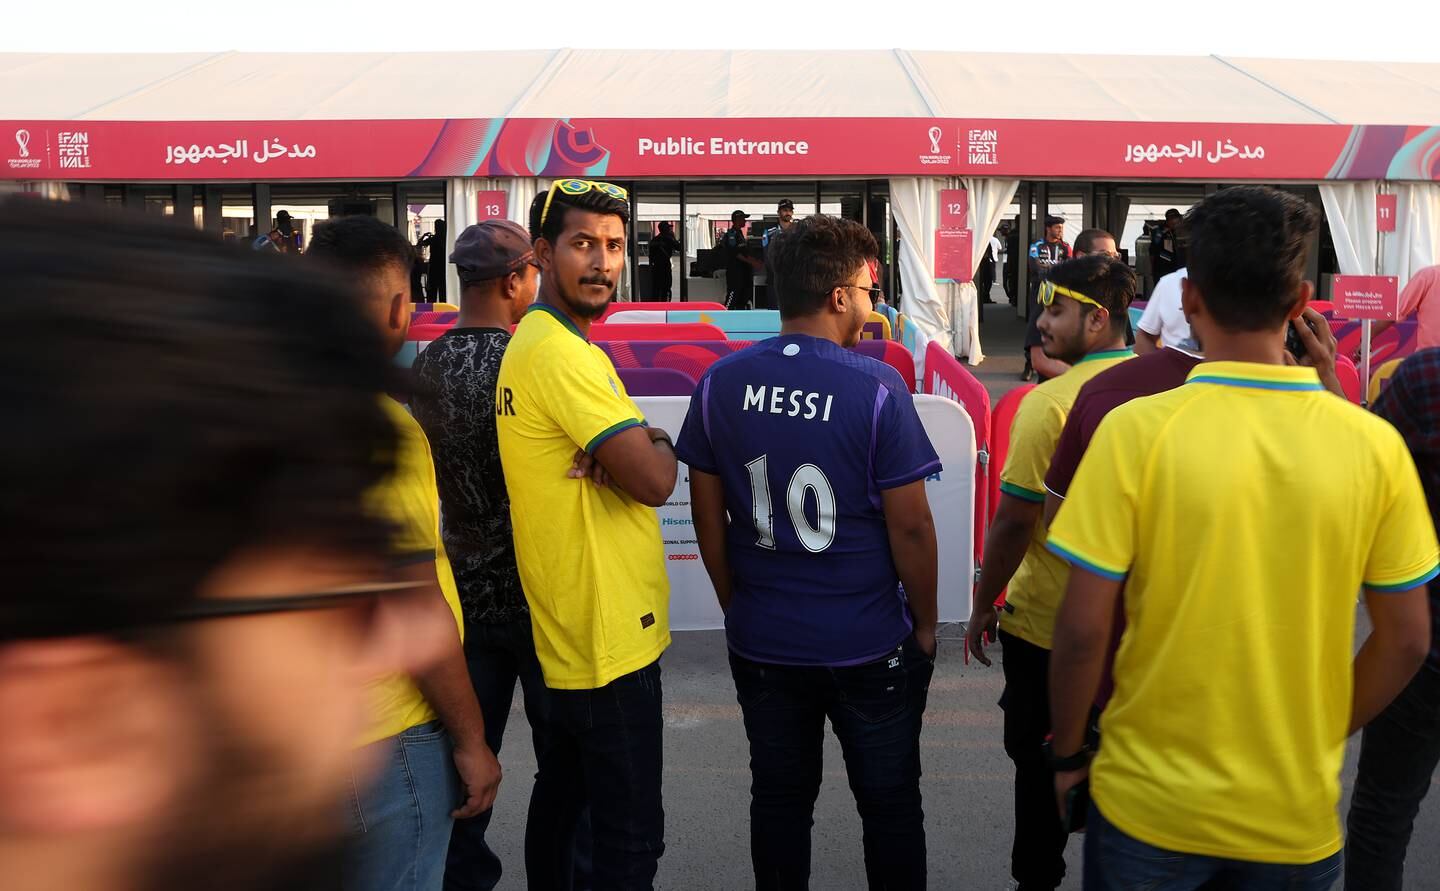 Supporters arrive at a fan zone in Doha. Getty